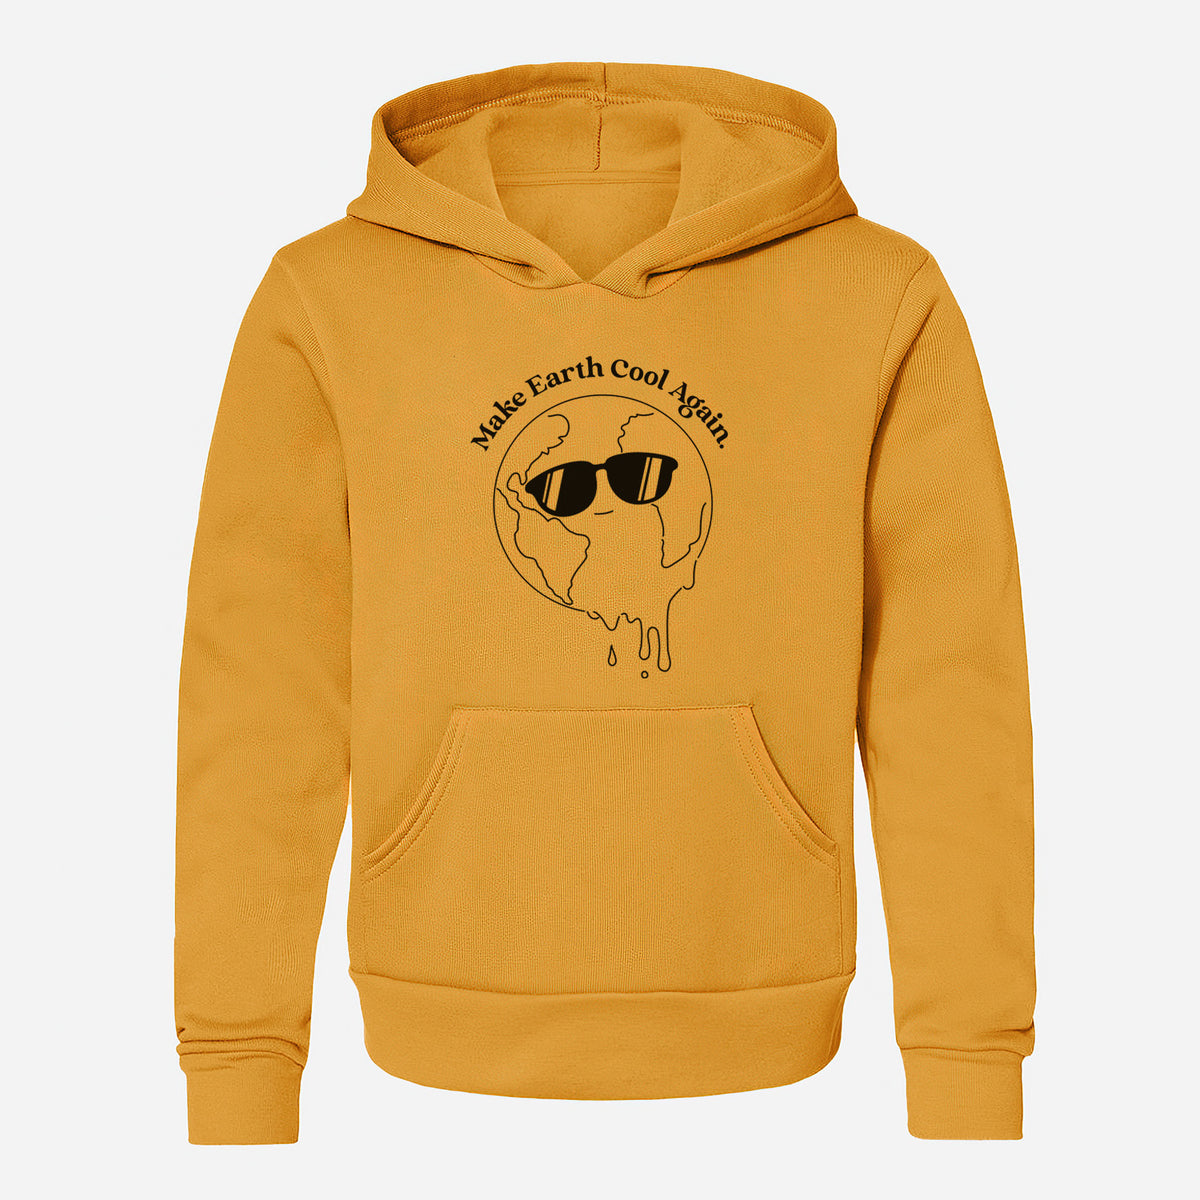 Make Earth Cool Again - Melted Planet - Youth Hoodie Sweatshirt